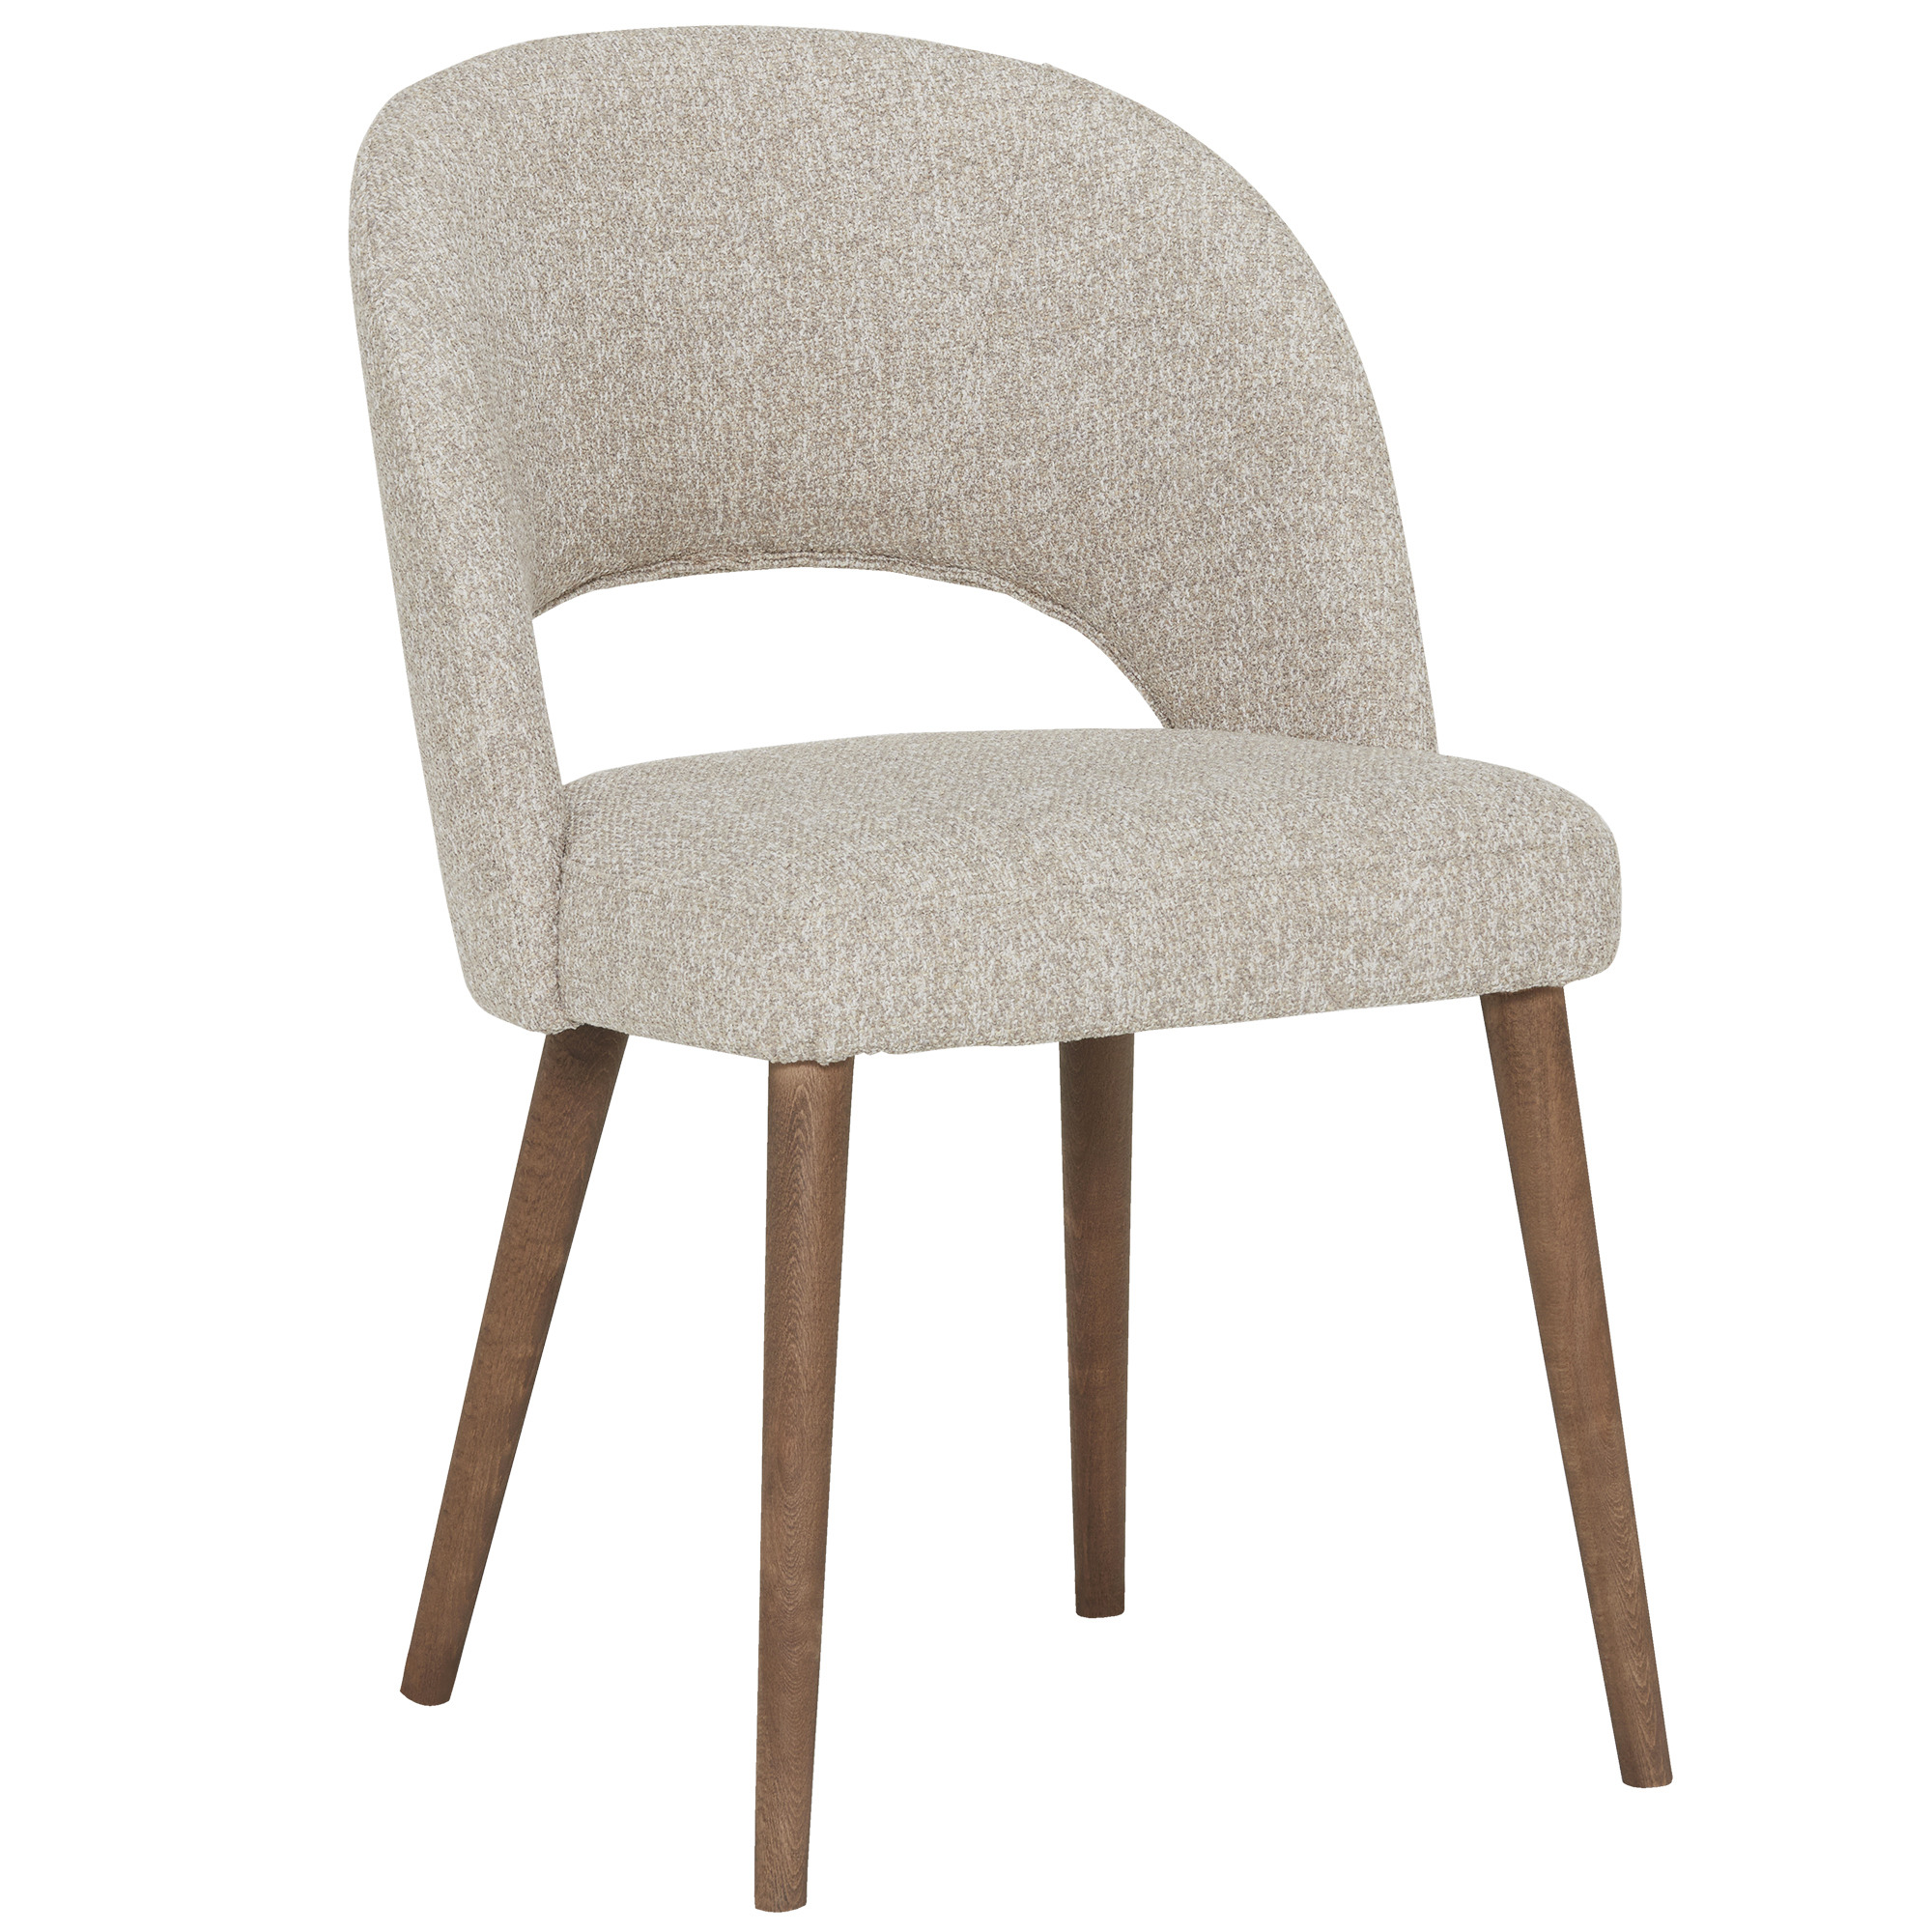 Pure Furniture Beck Dining Chair With Wooden Legs, Neutral Leather - Barker & Stonehouse - image 1